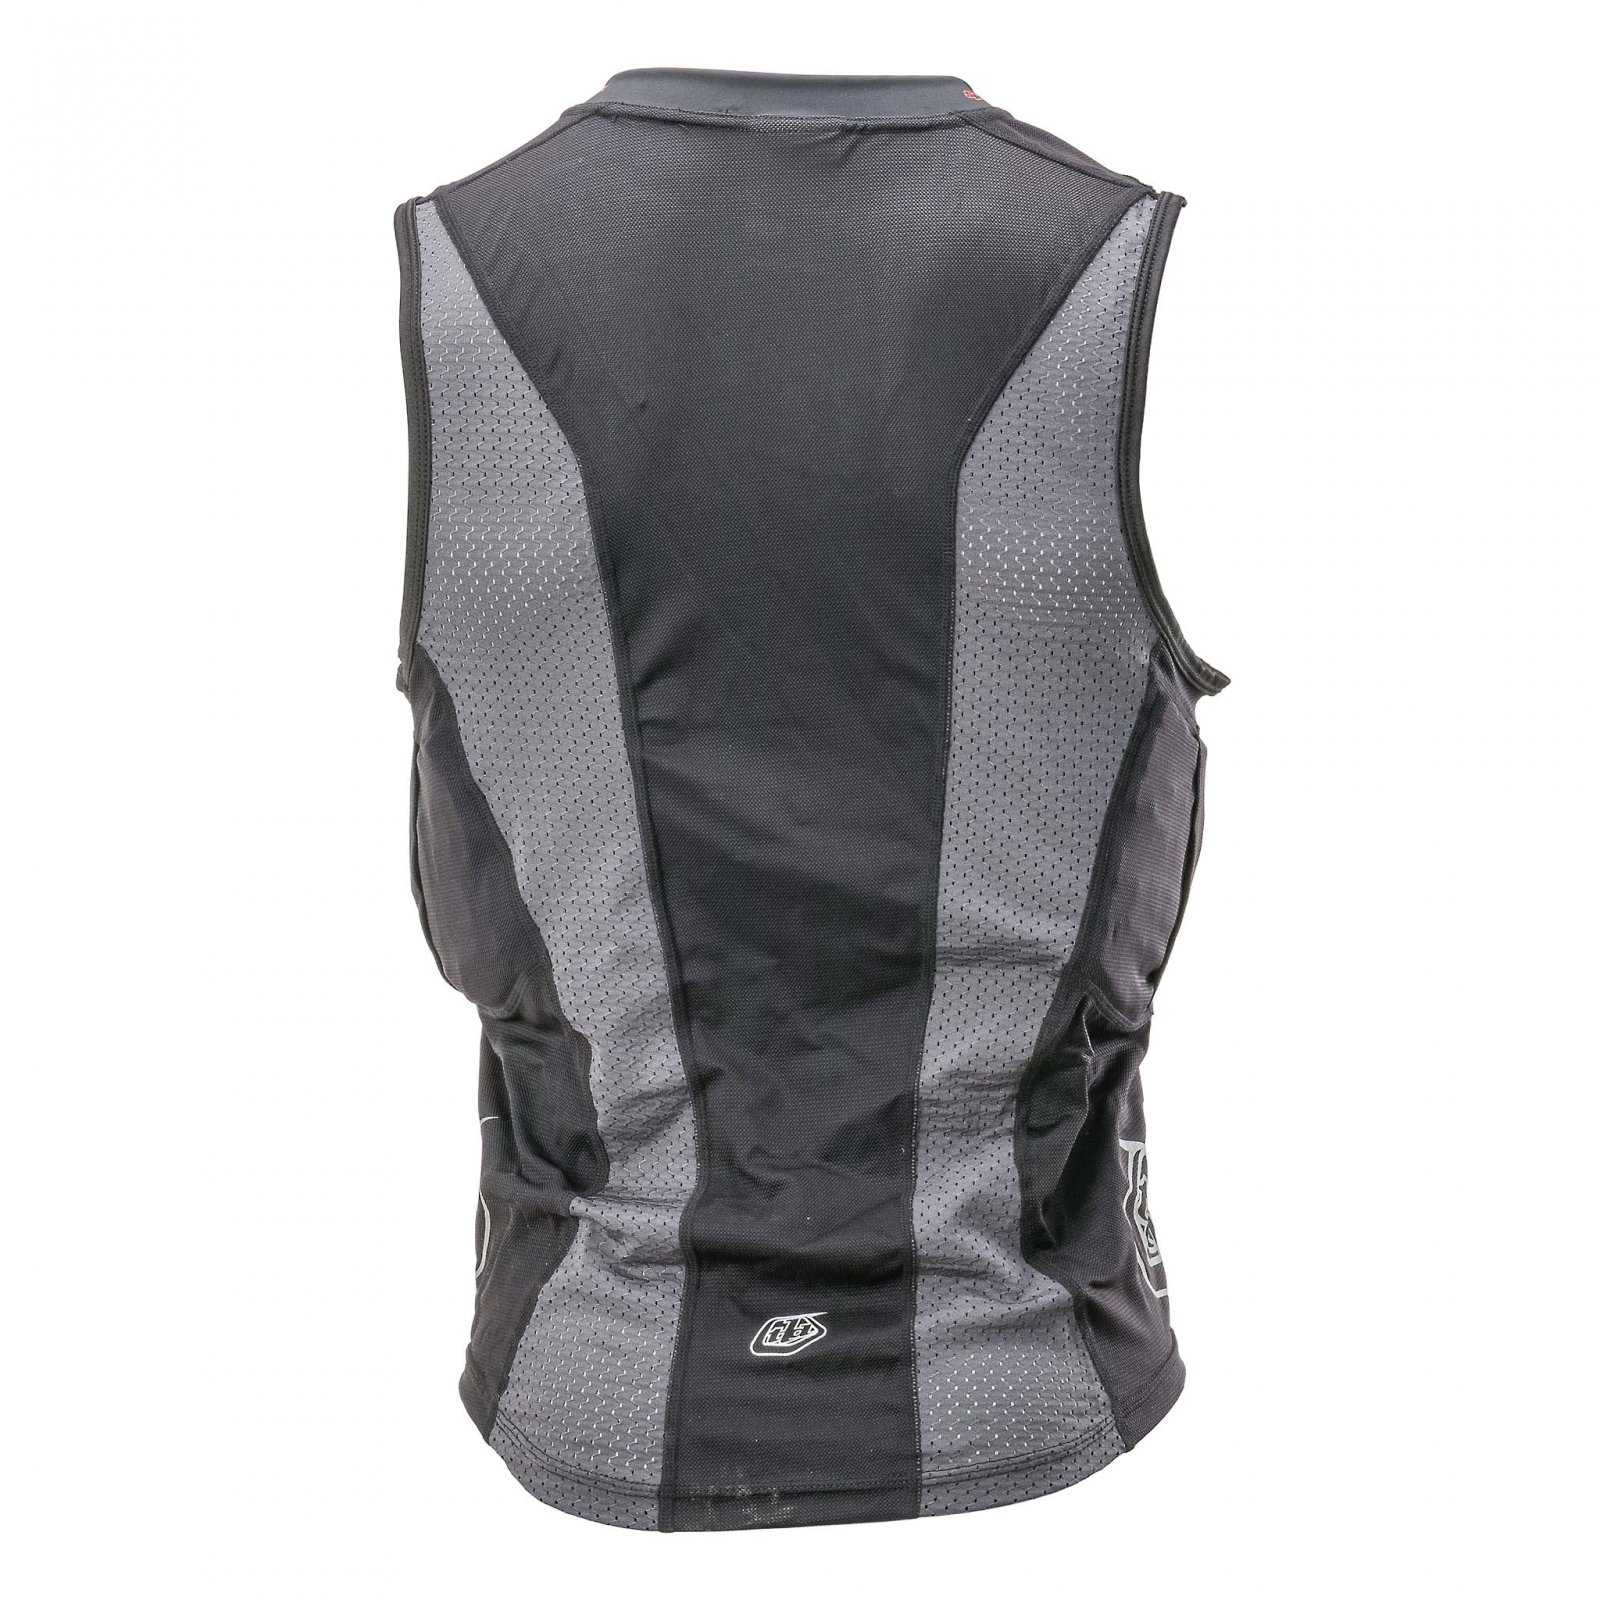 7855 Details about   New Troy Lee Designs UPL7855 Protective Long Sleeve Shirt Chest Protector 